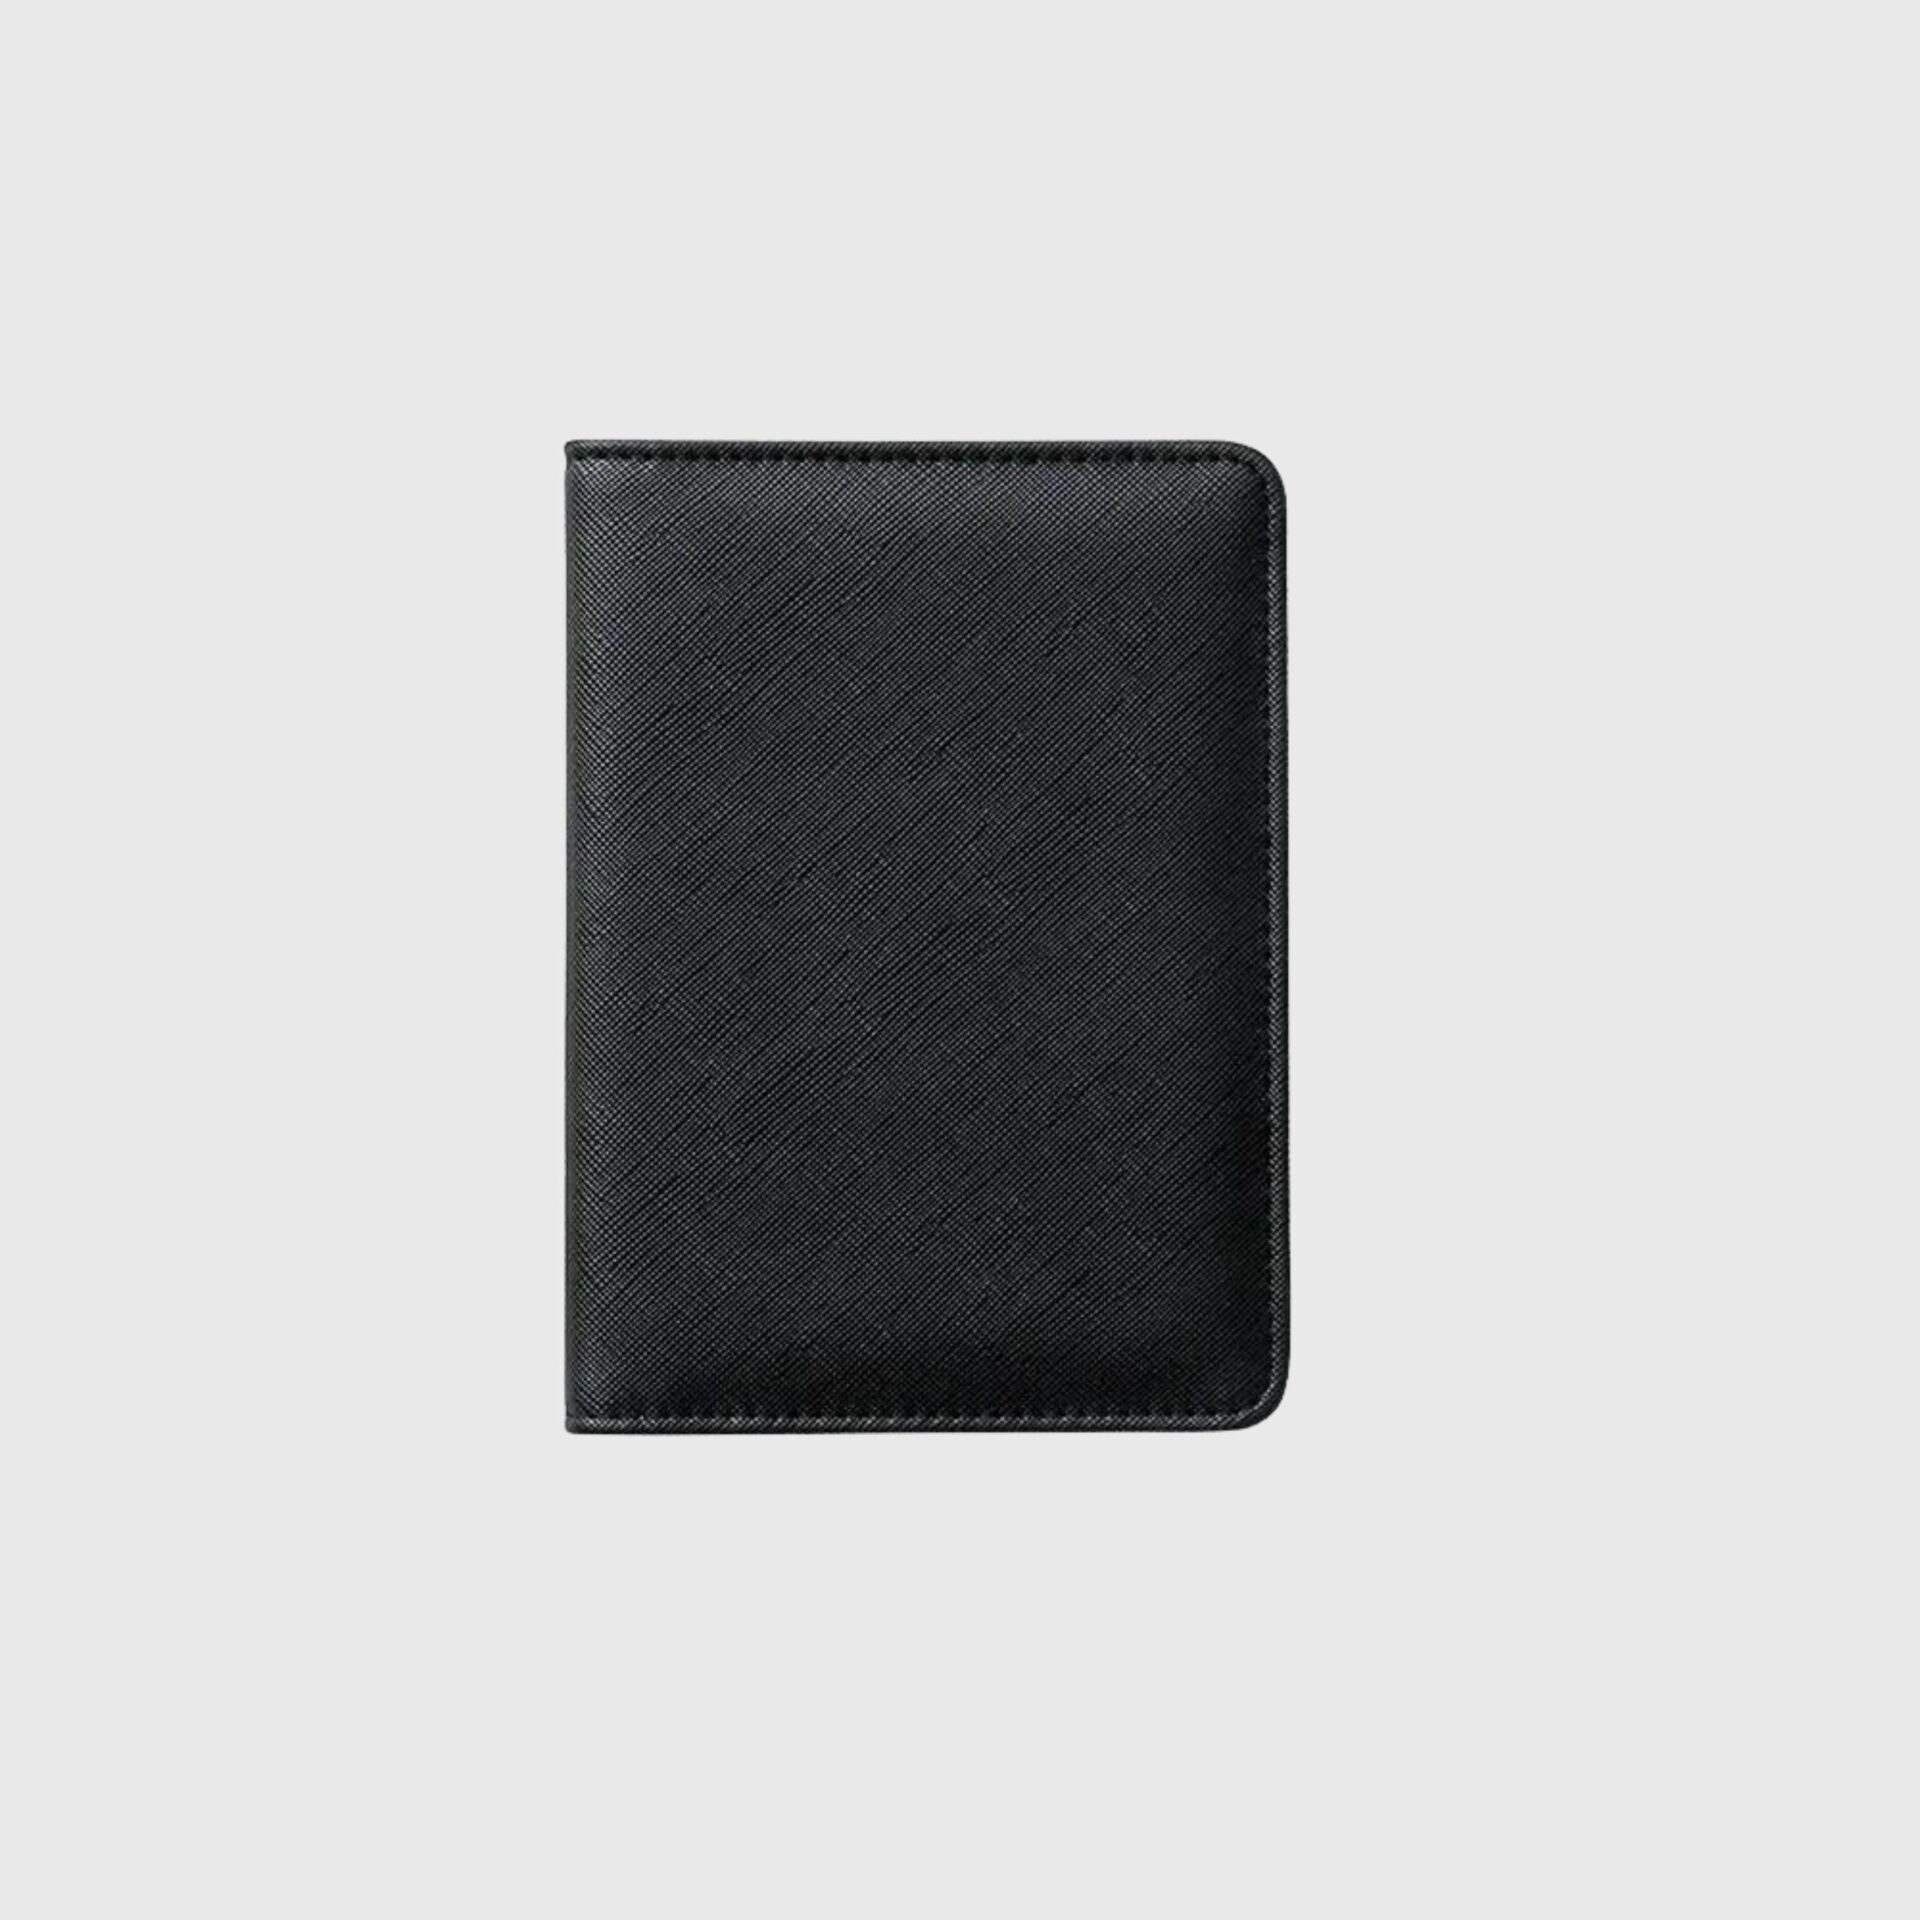 Dokimi leather passport holder corporate gifts singapore Pisteuo and Co. black